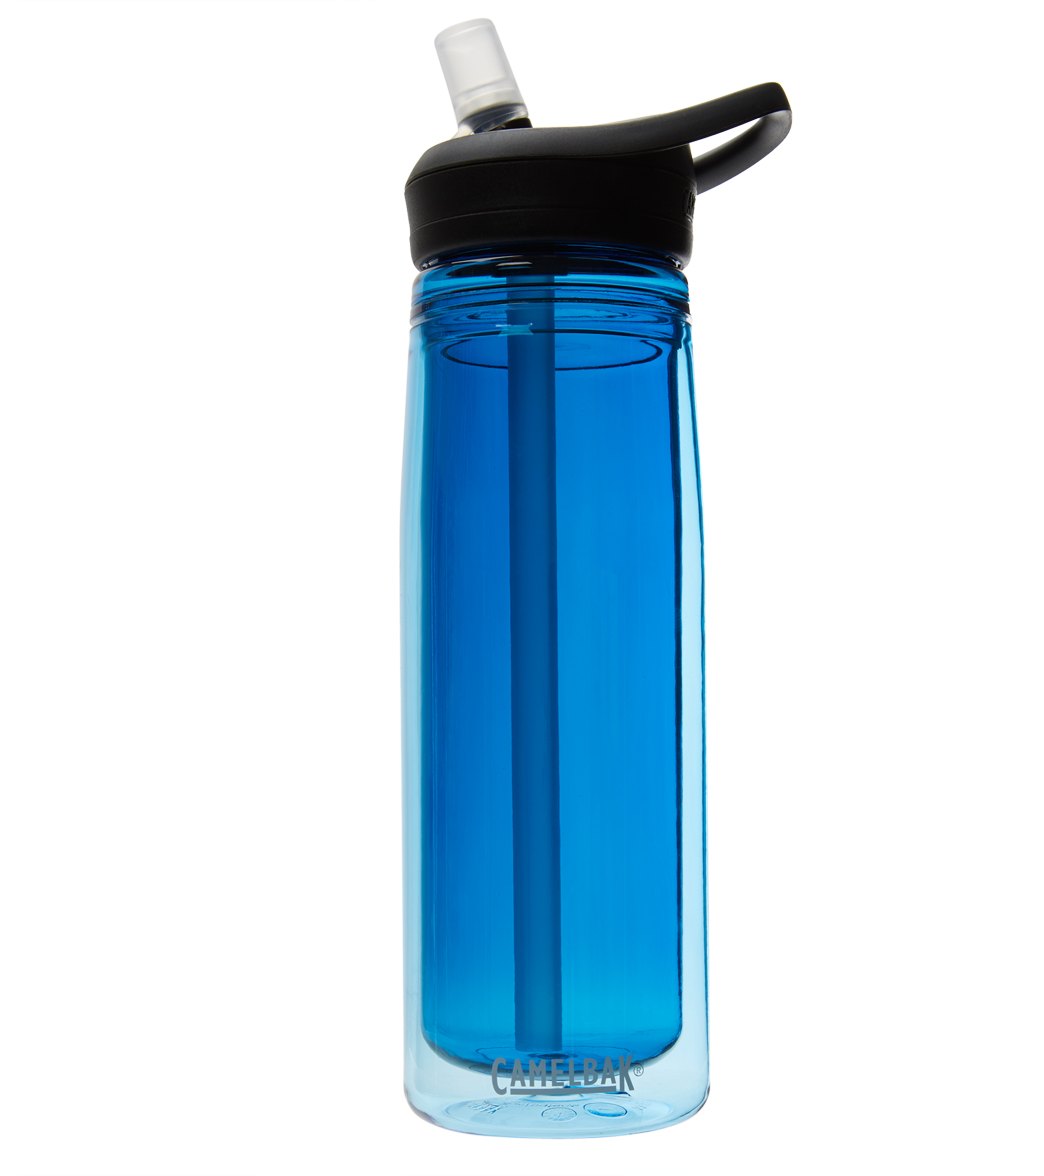 Camelbak Eddy Plus Insulated Bottle at SwimOutlet.com